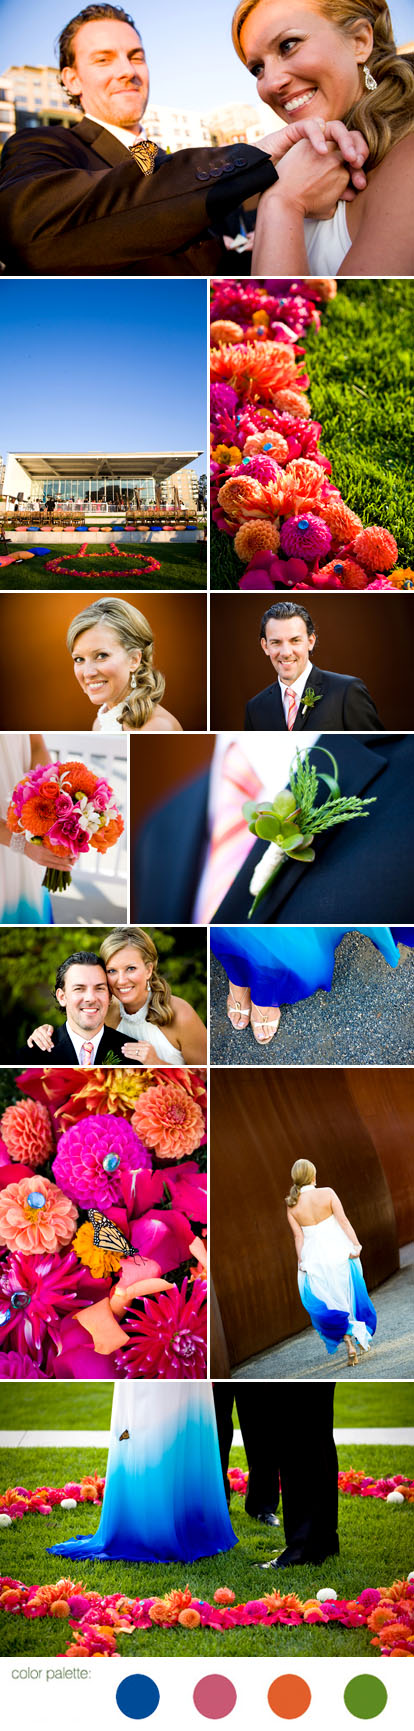 Stephanie Cristalli Photography, Indian inspired summer wedding, pink, orange blue and green wedding color palette